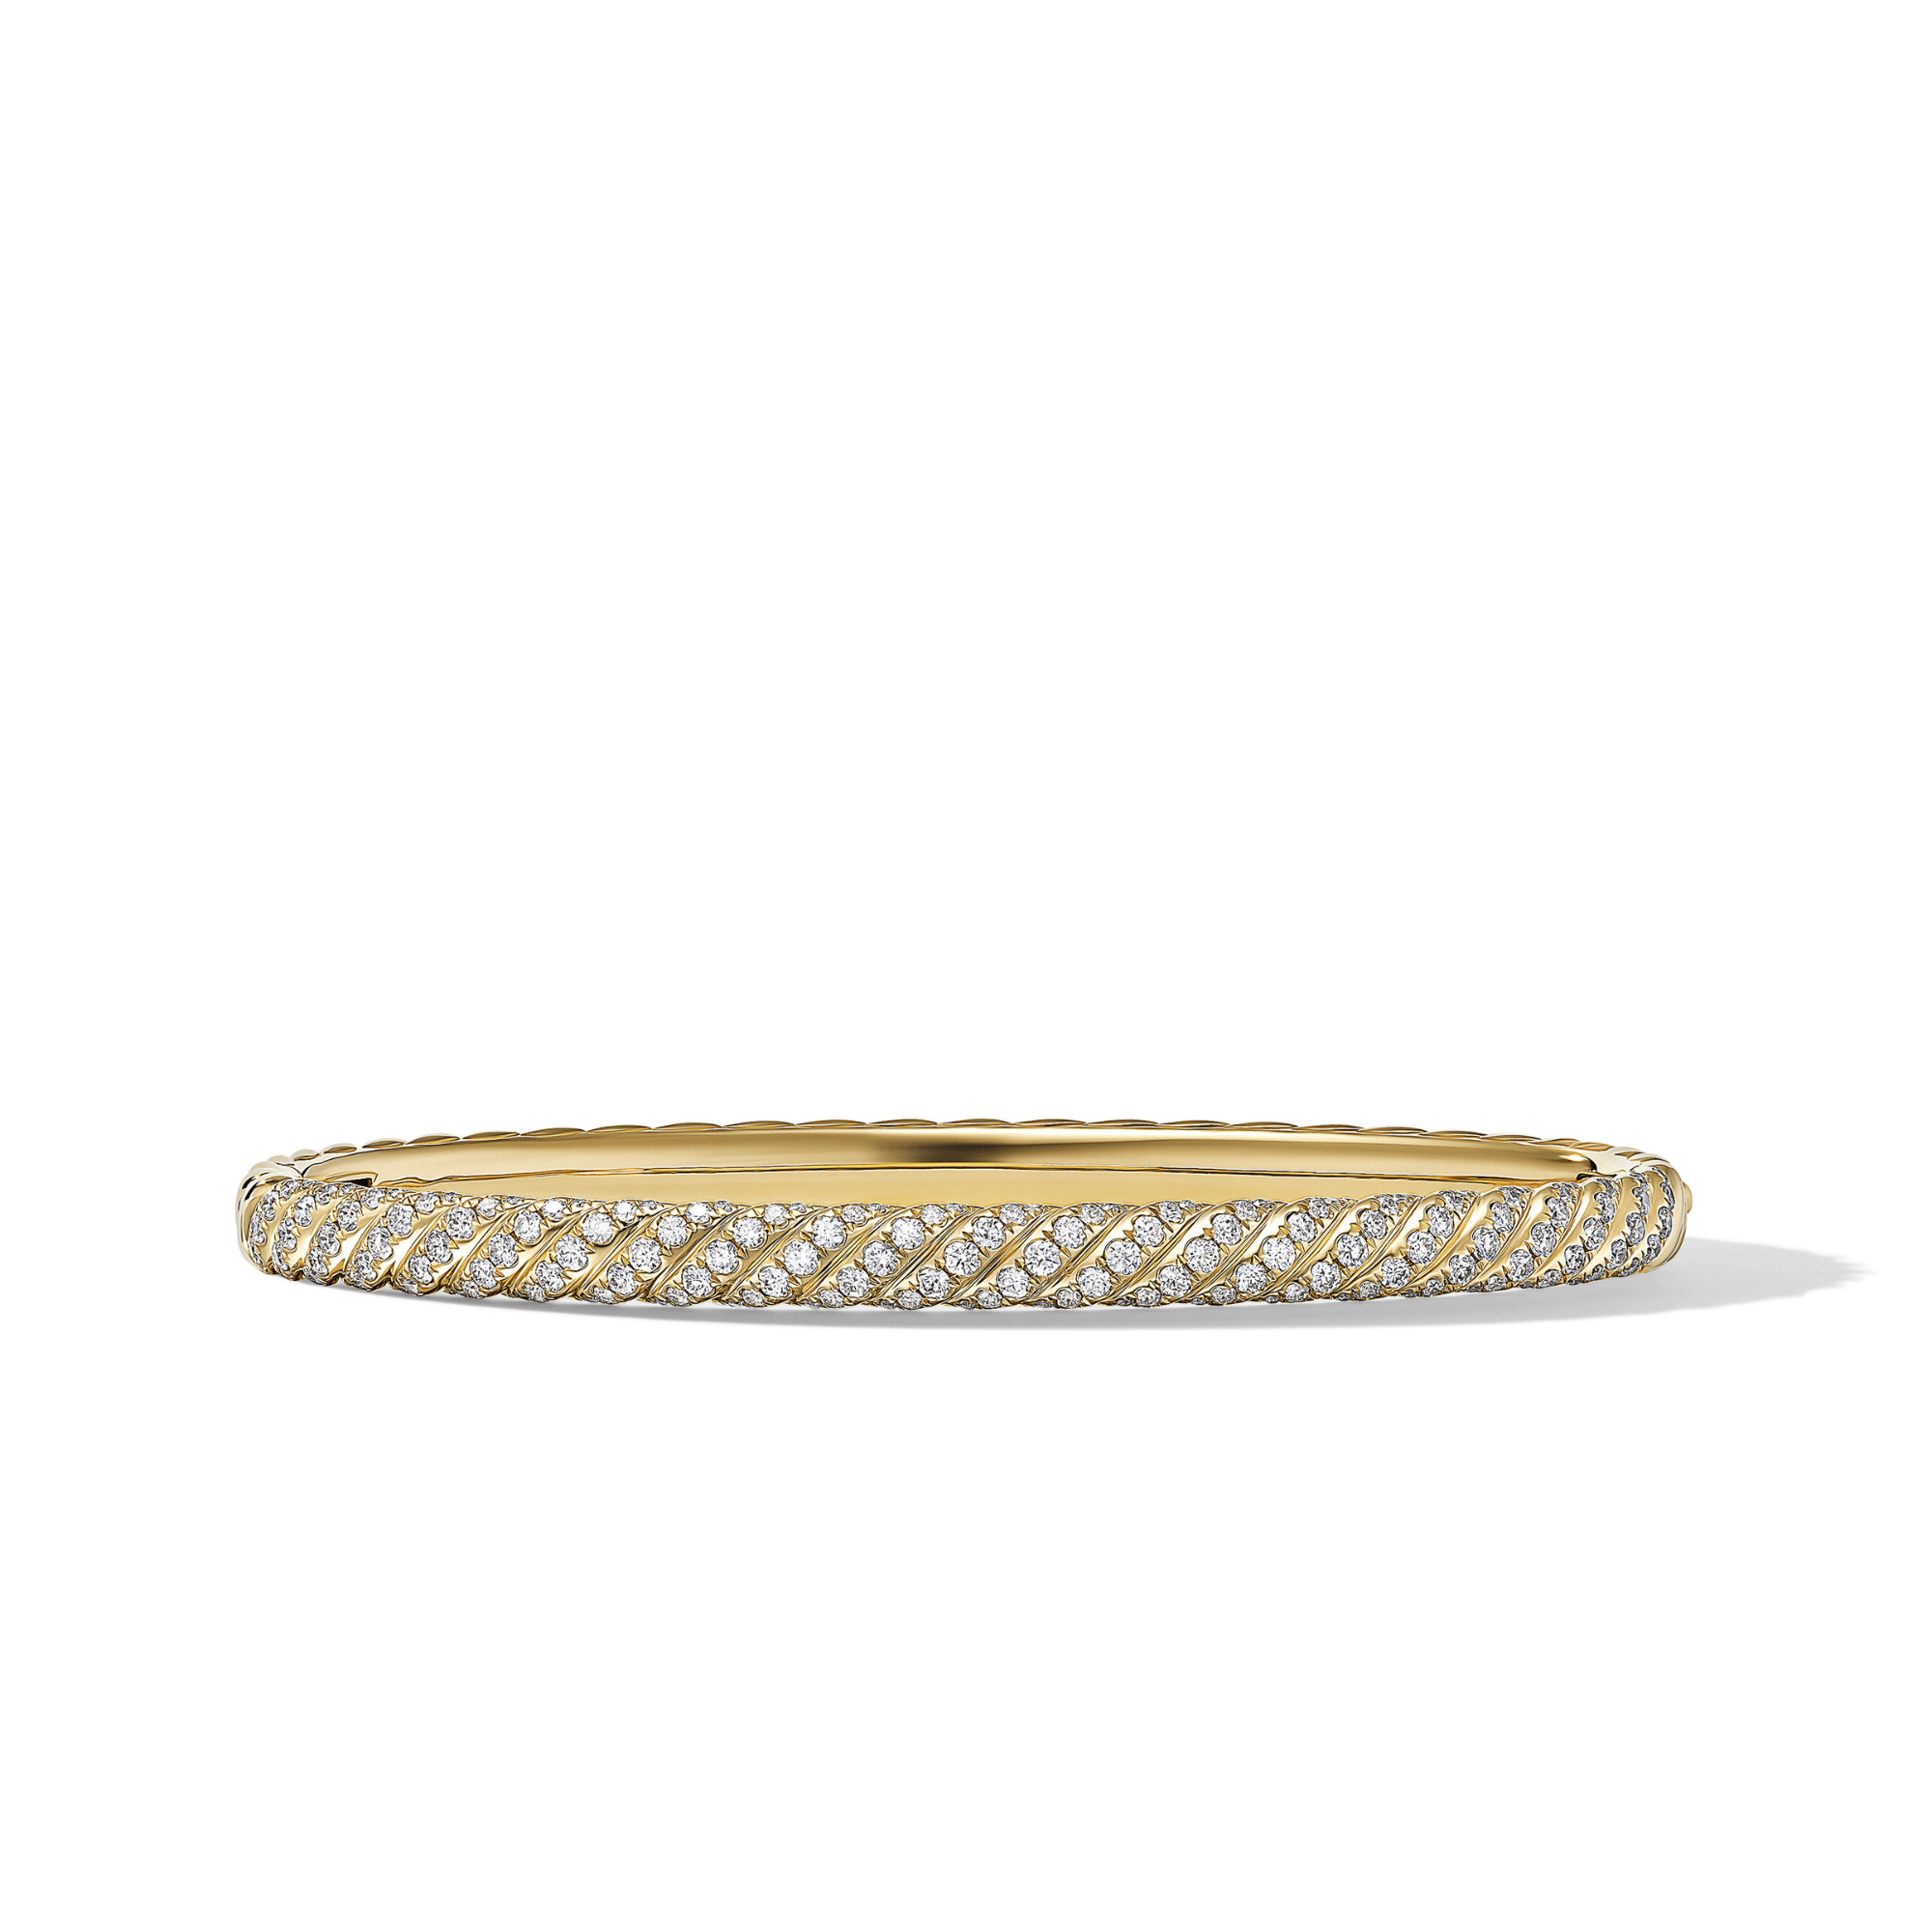 David Yurman Sculpted Cable Bangle Bracelet in 18ct Yellow Gold with Diamonds